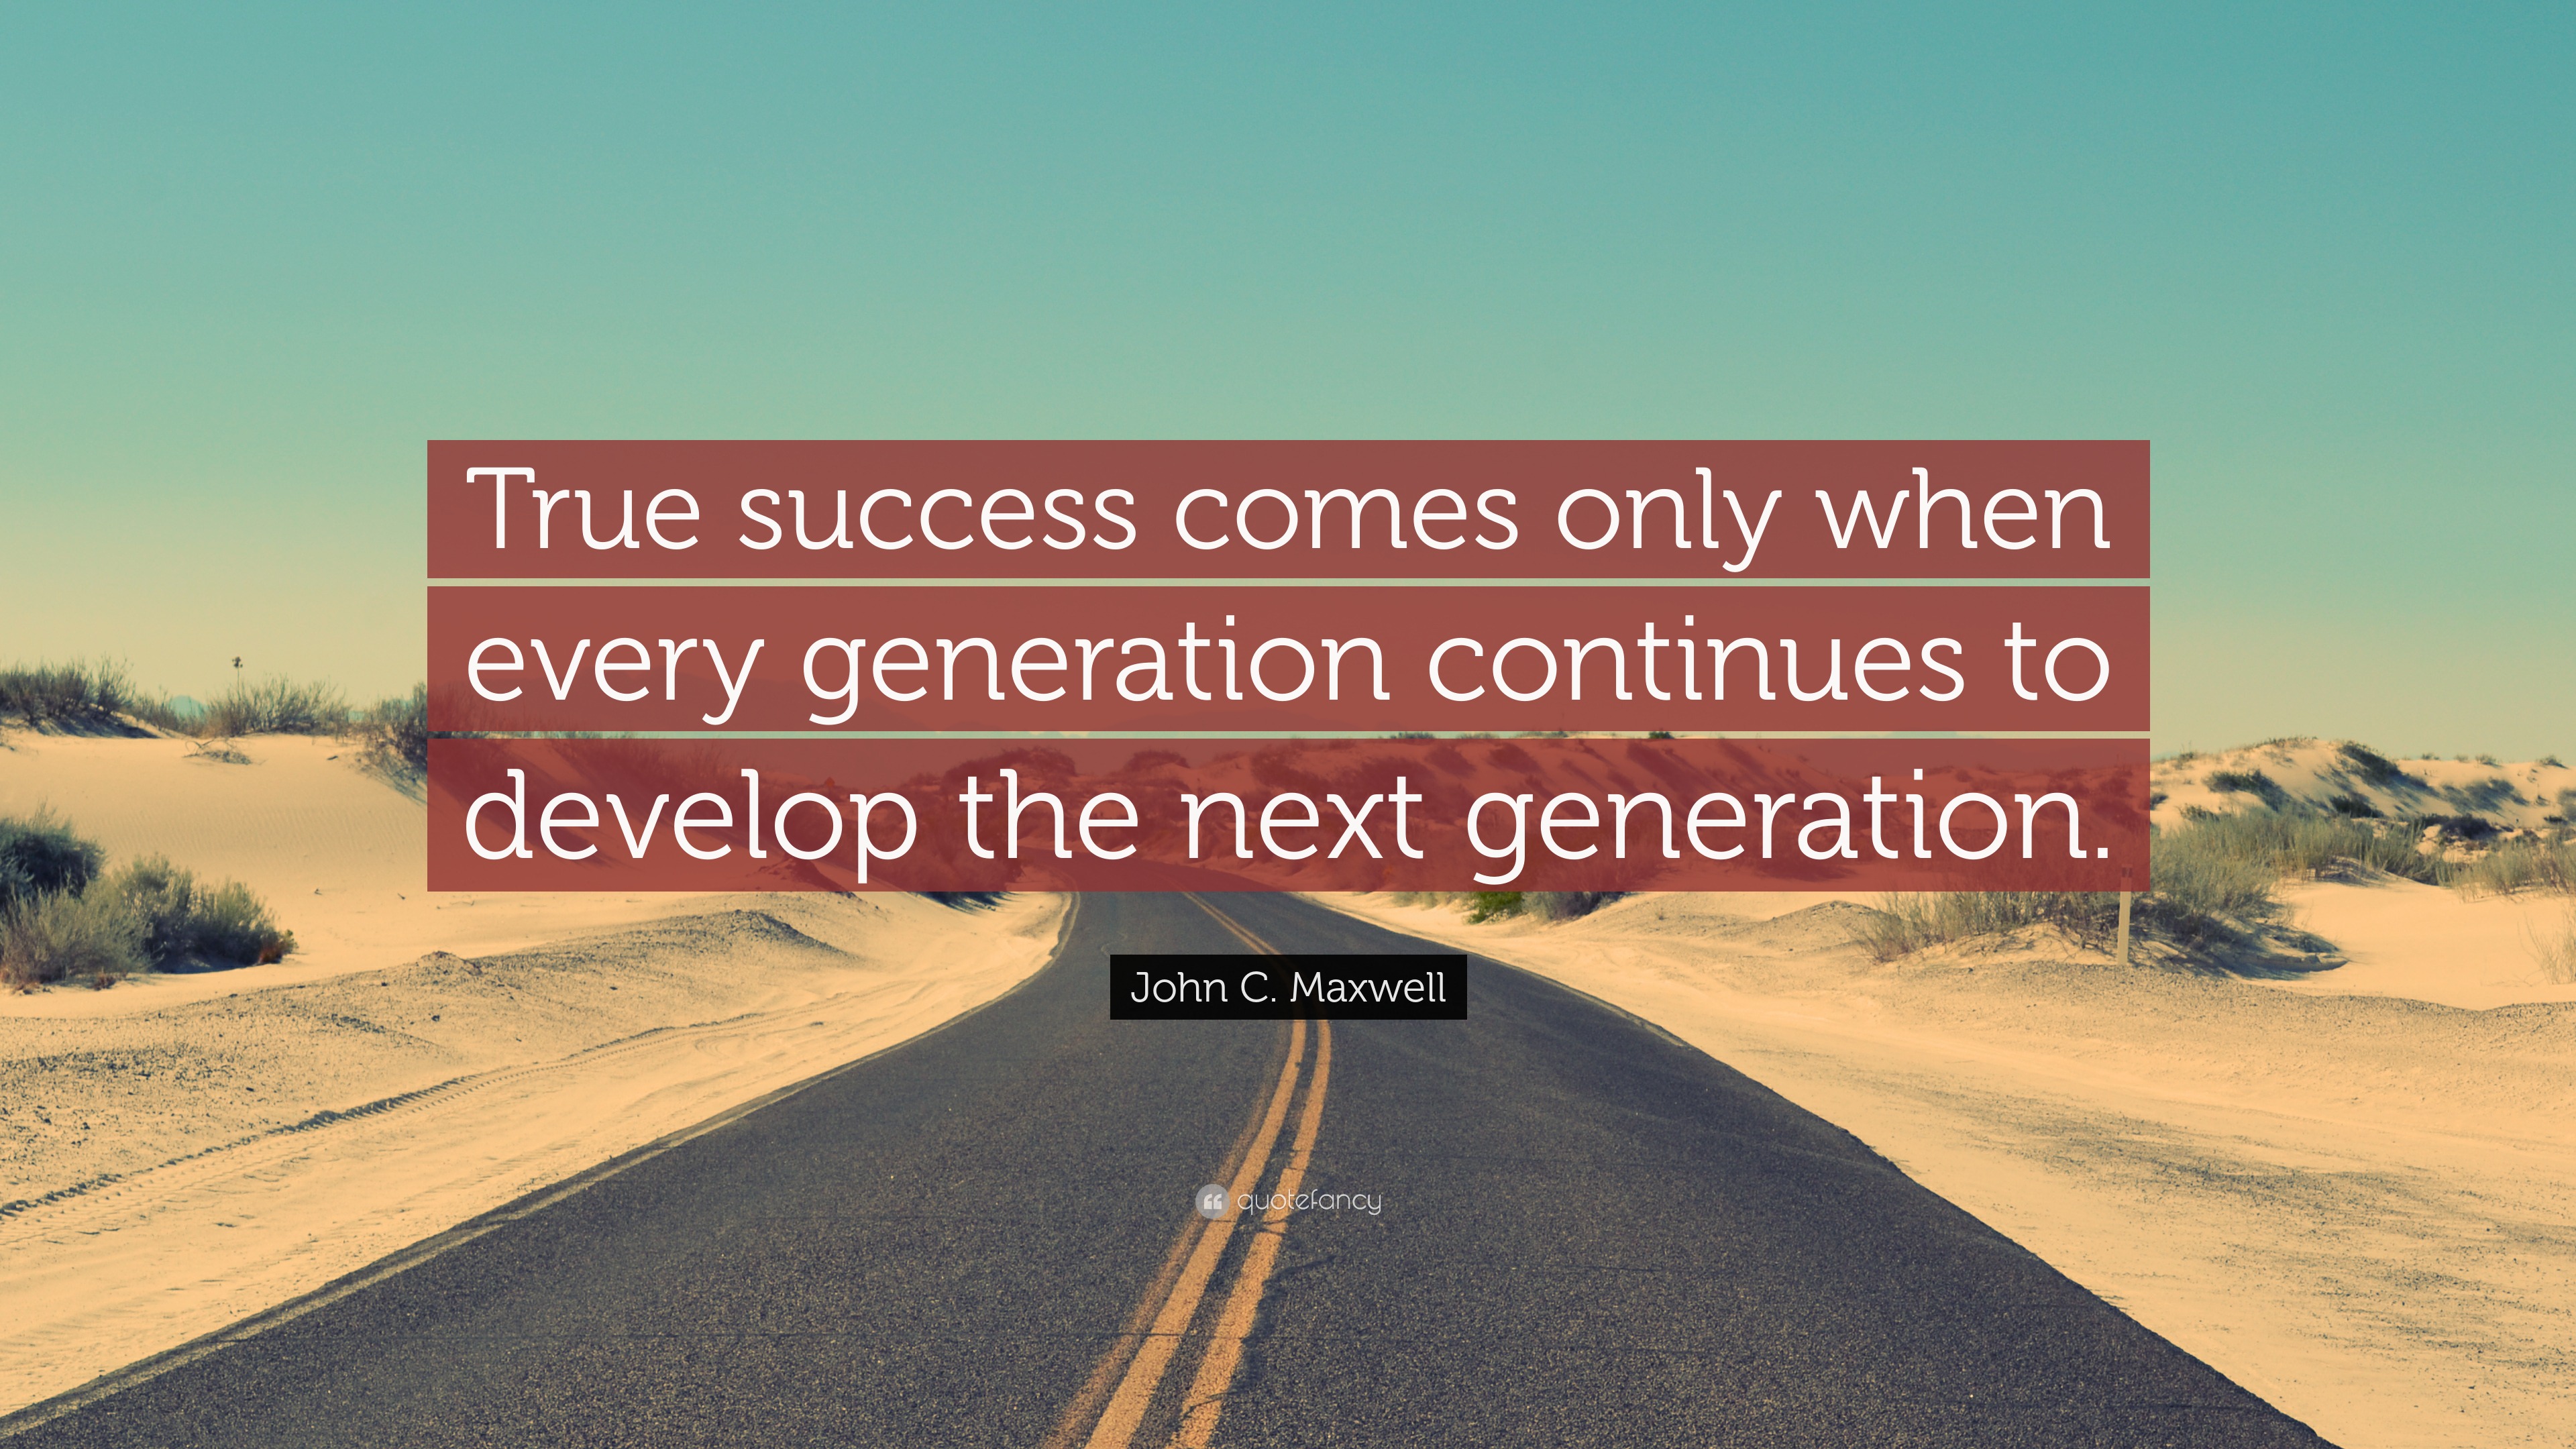 John C. Maxwell Quote: “True success comes only when every generation ...